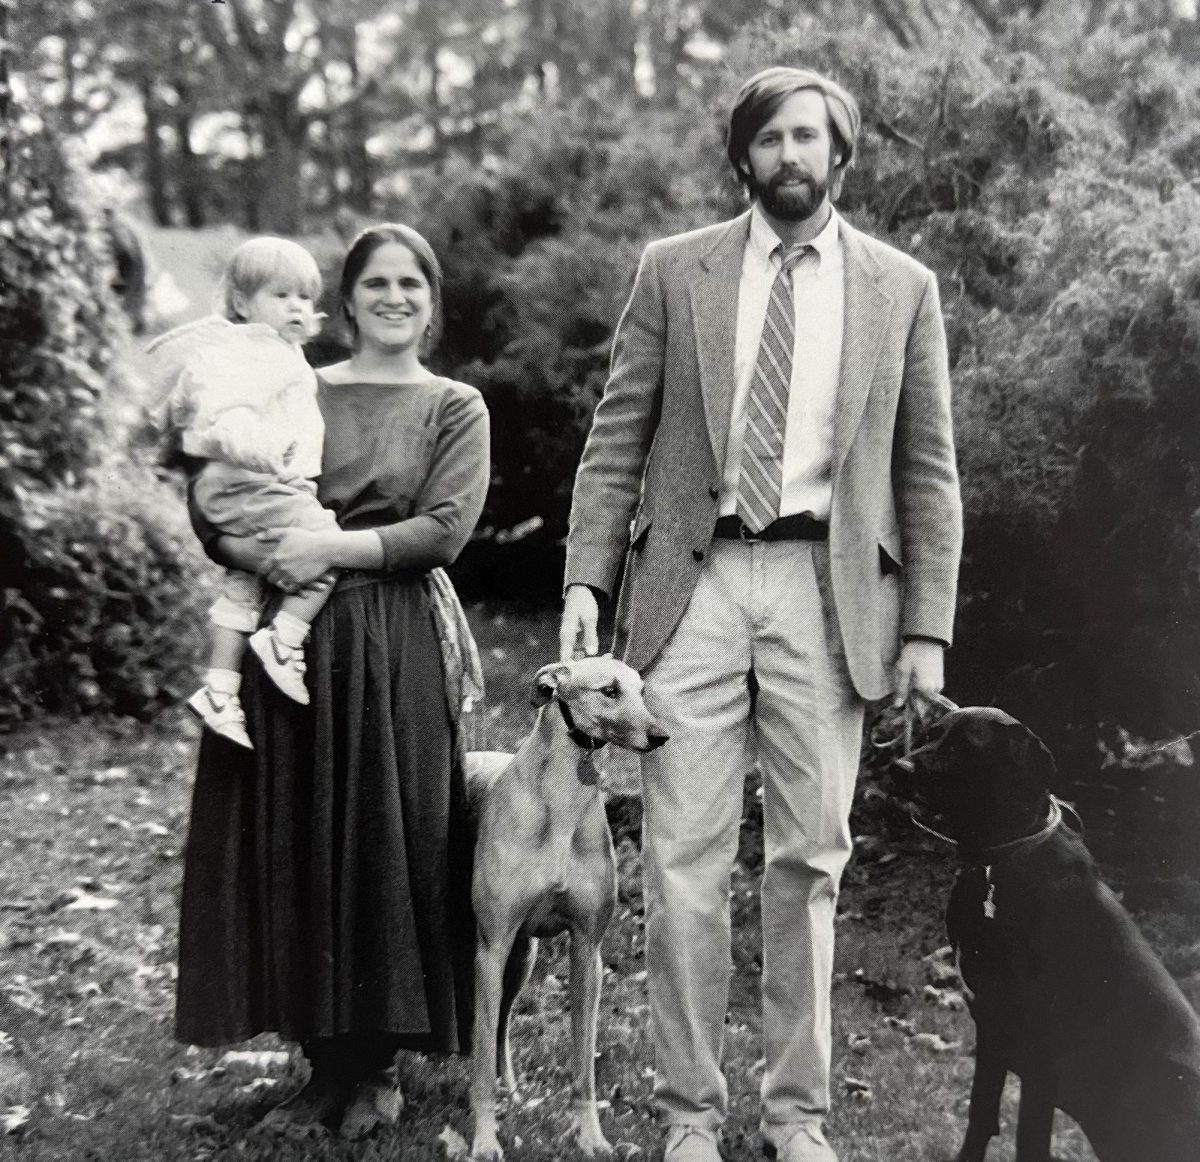 Mr.+and+Mrs.+Cooper+and+their+family+in+a+Mischianza+photo+from+the+early+1990s.